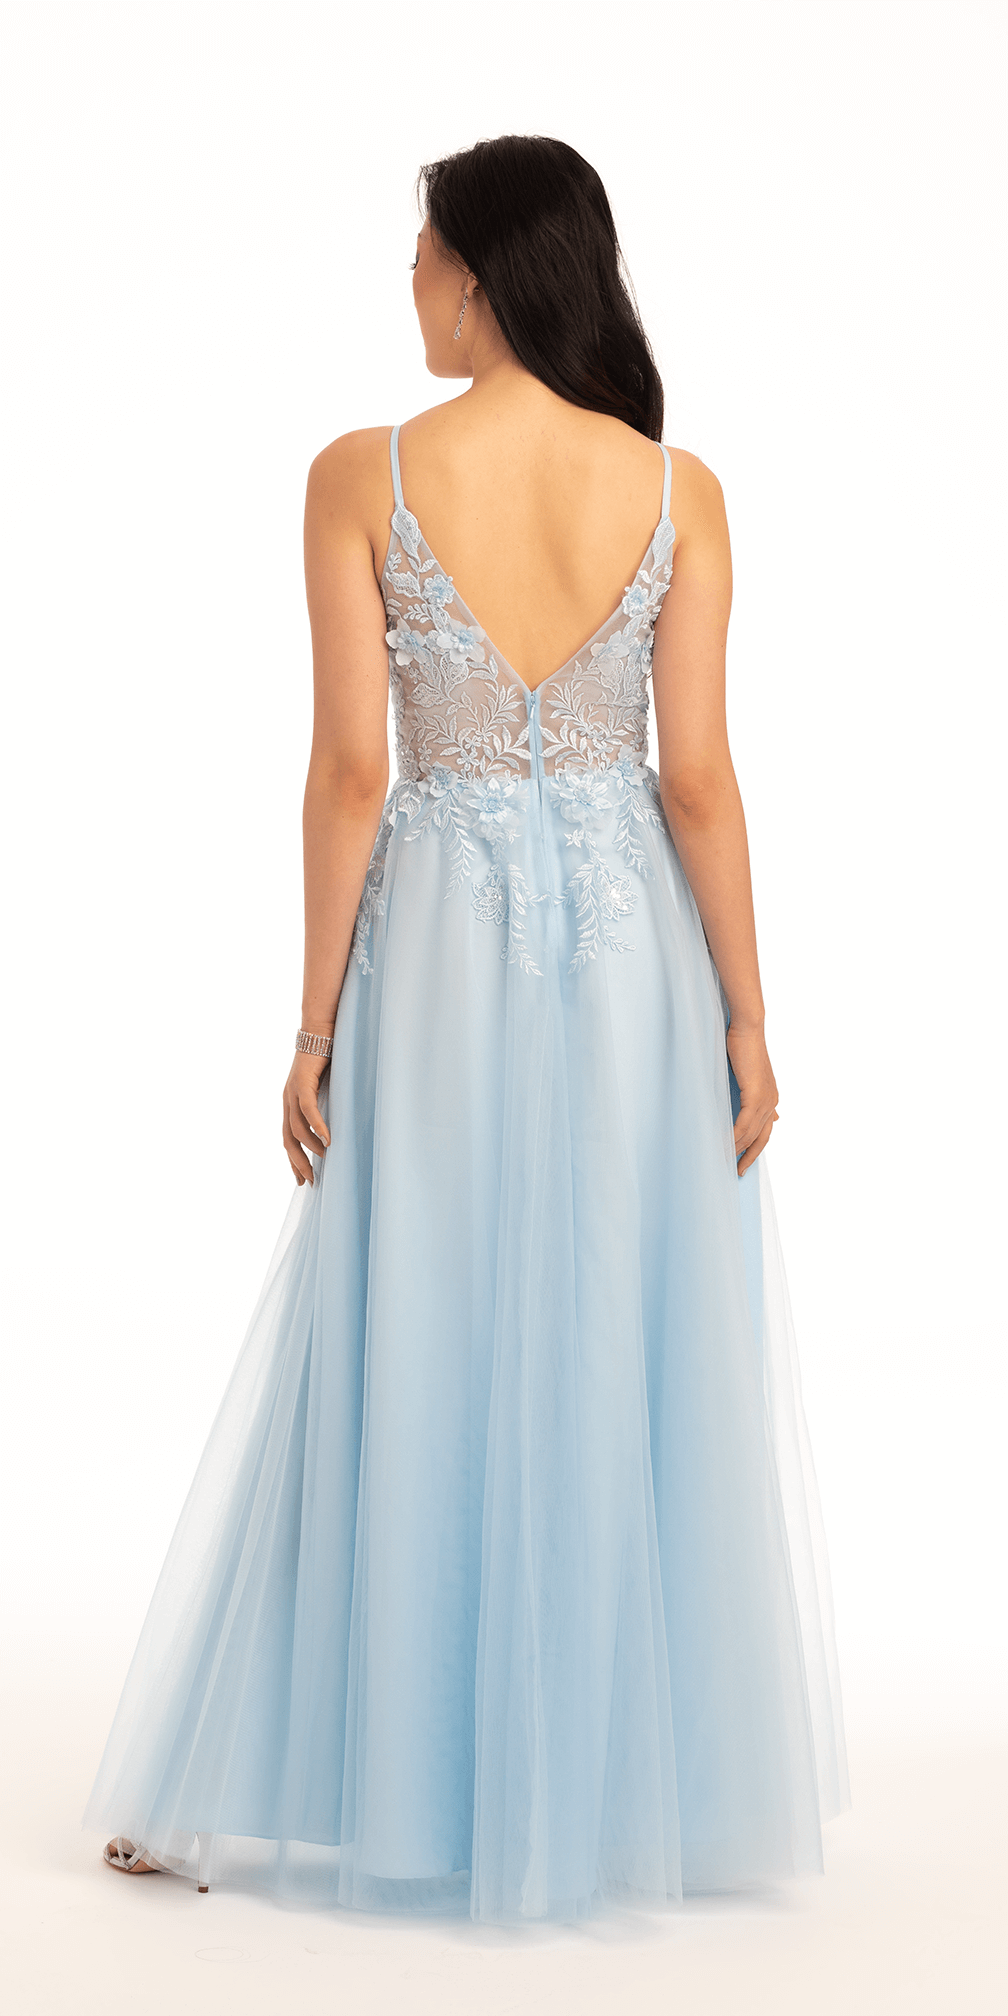 Camille La Vie Floral Embroidered Sweetheart Tulle Ballgown